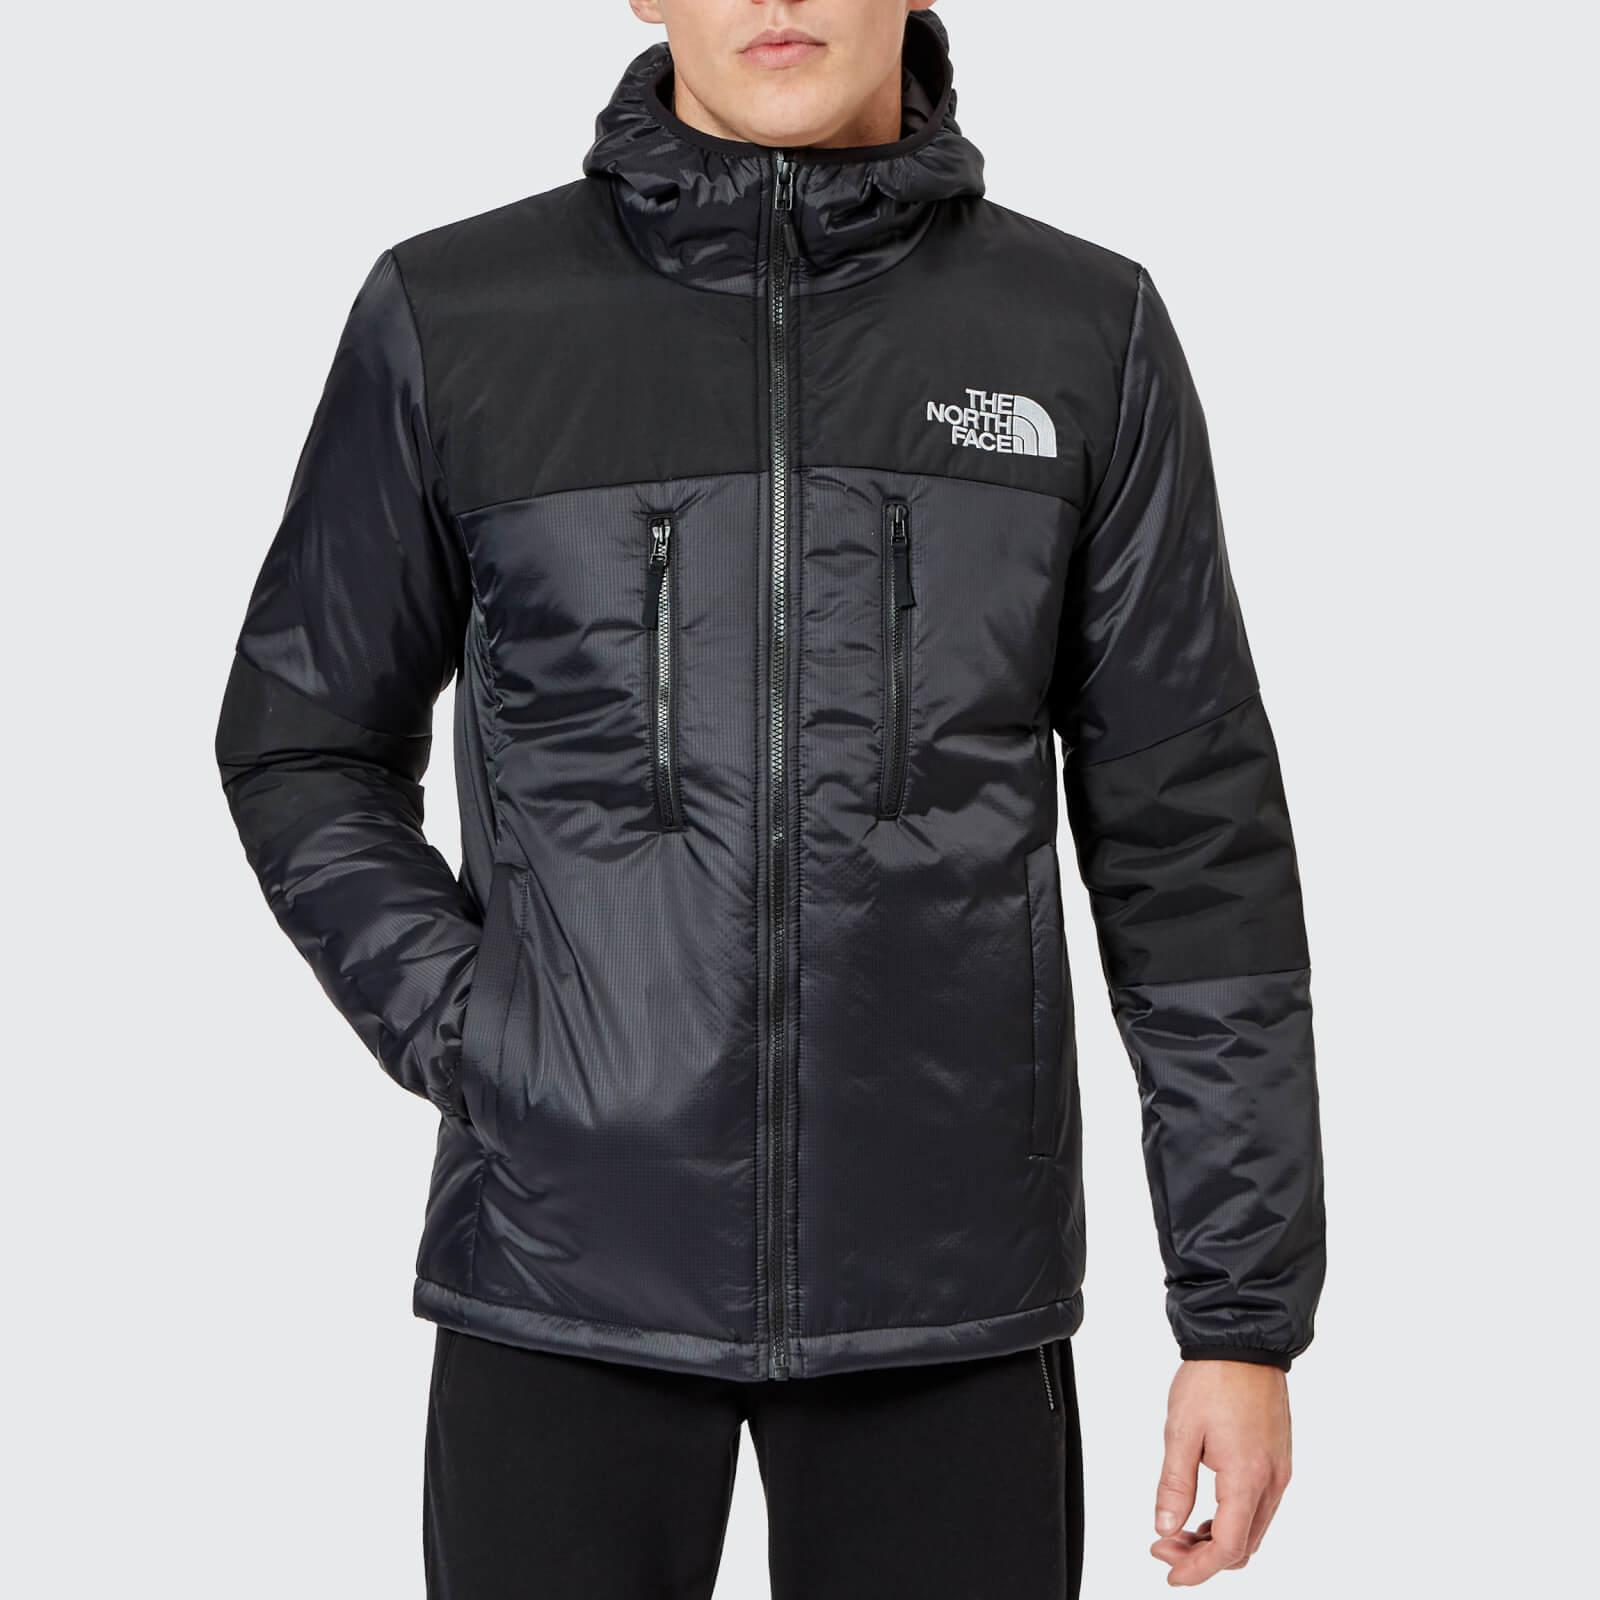 The North Face Himalayan Light Synthetic Hoodie in Black for Men - Lyst